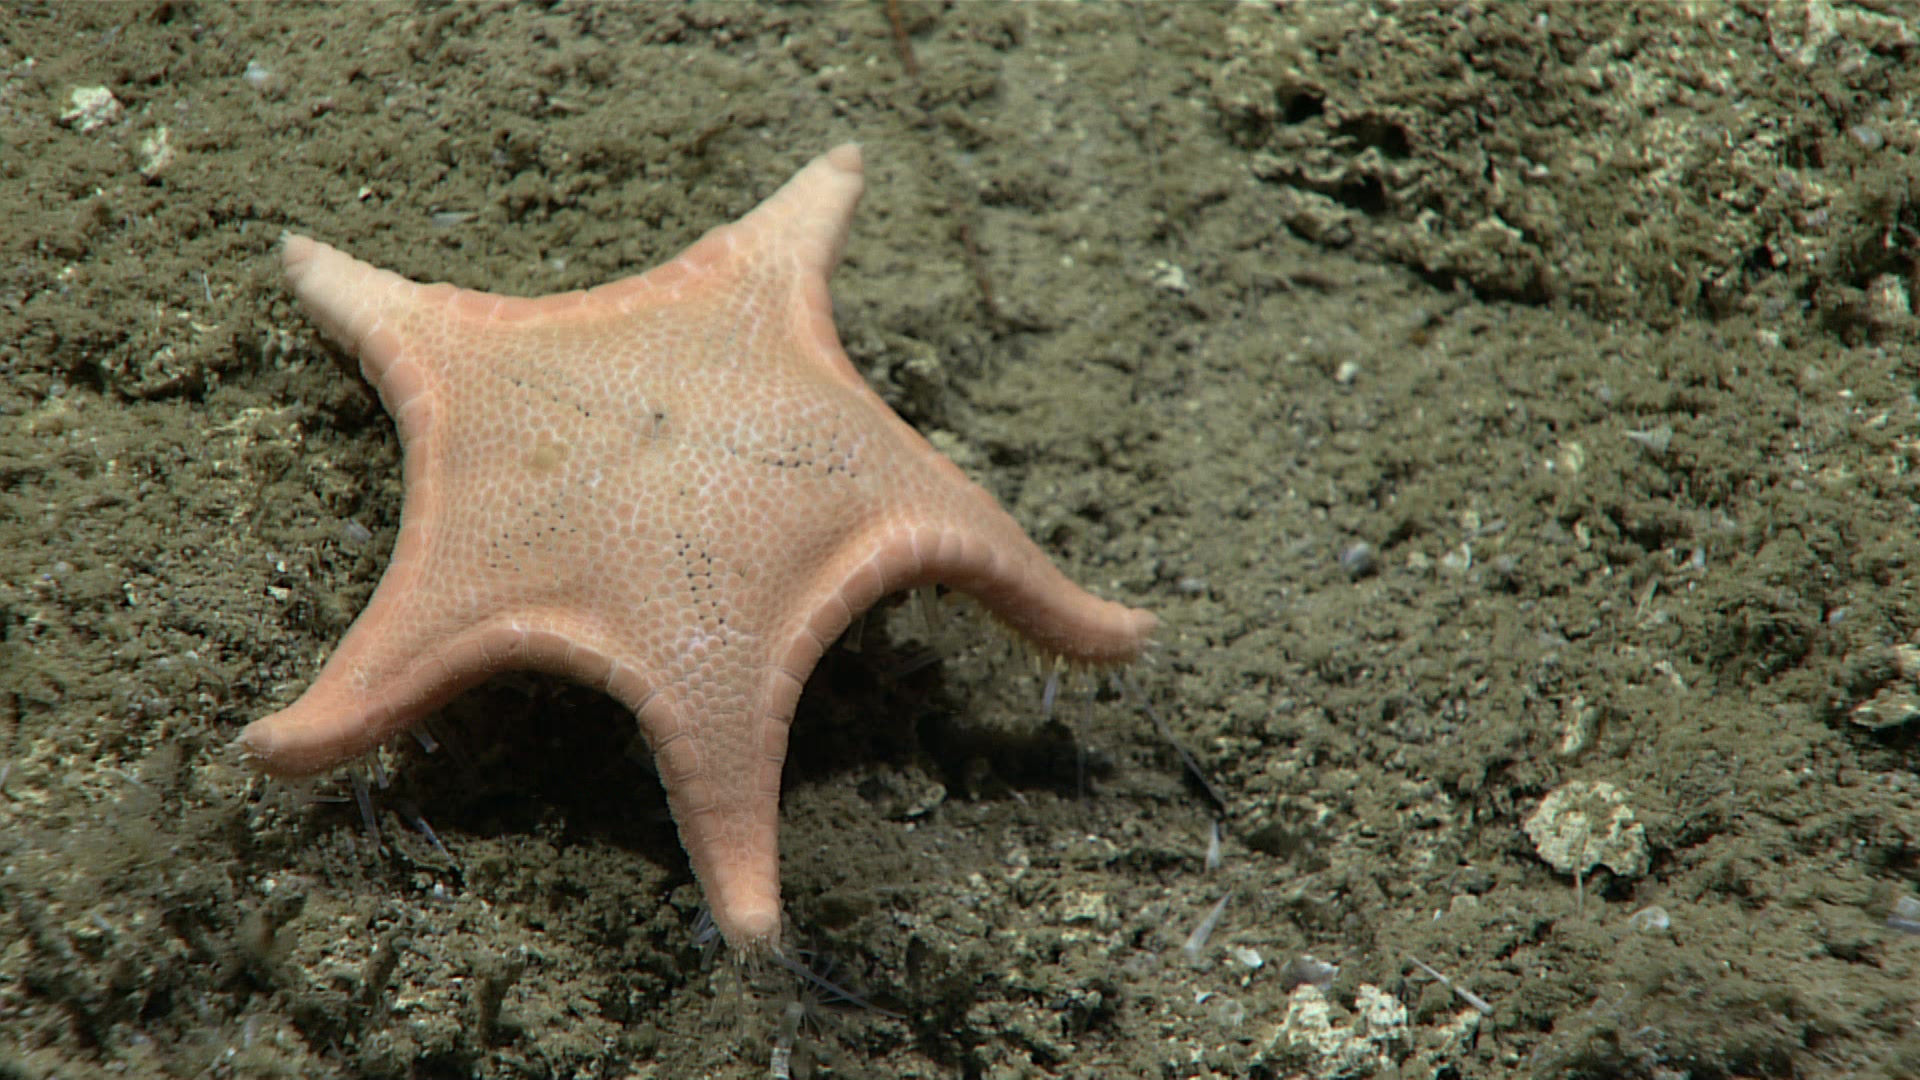 Named after NOAA Ocean Exploration’s remotely operated vehicle Deep Discoverer, this sea star (Sibogaster bathyheuretor) was seen feeding in the soft, unconsolidated seafloor in the Gulf of Mexico in 2018.